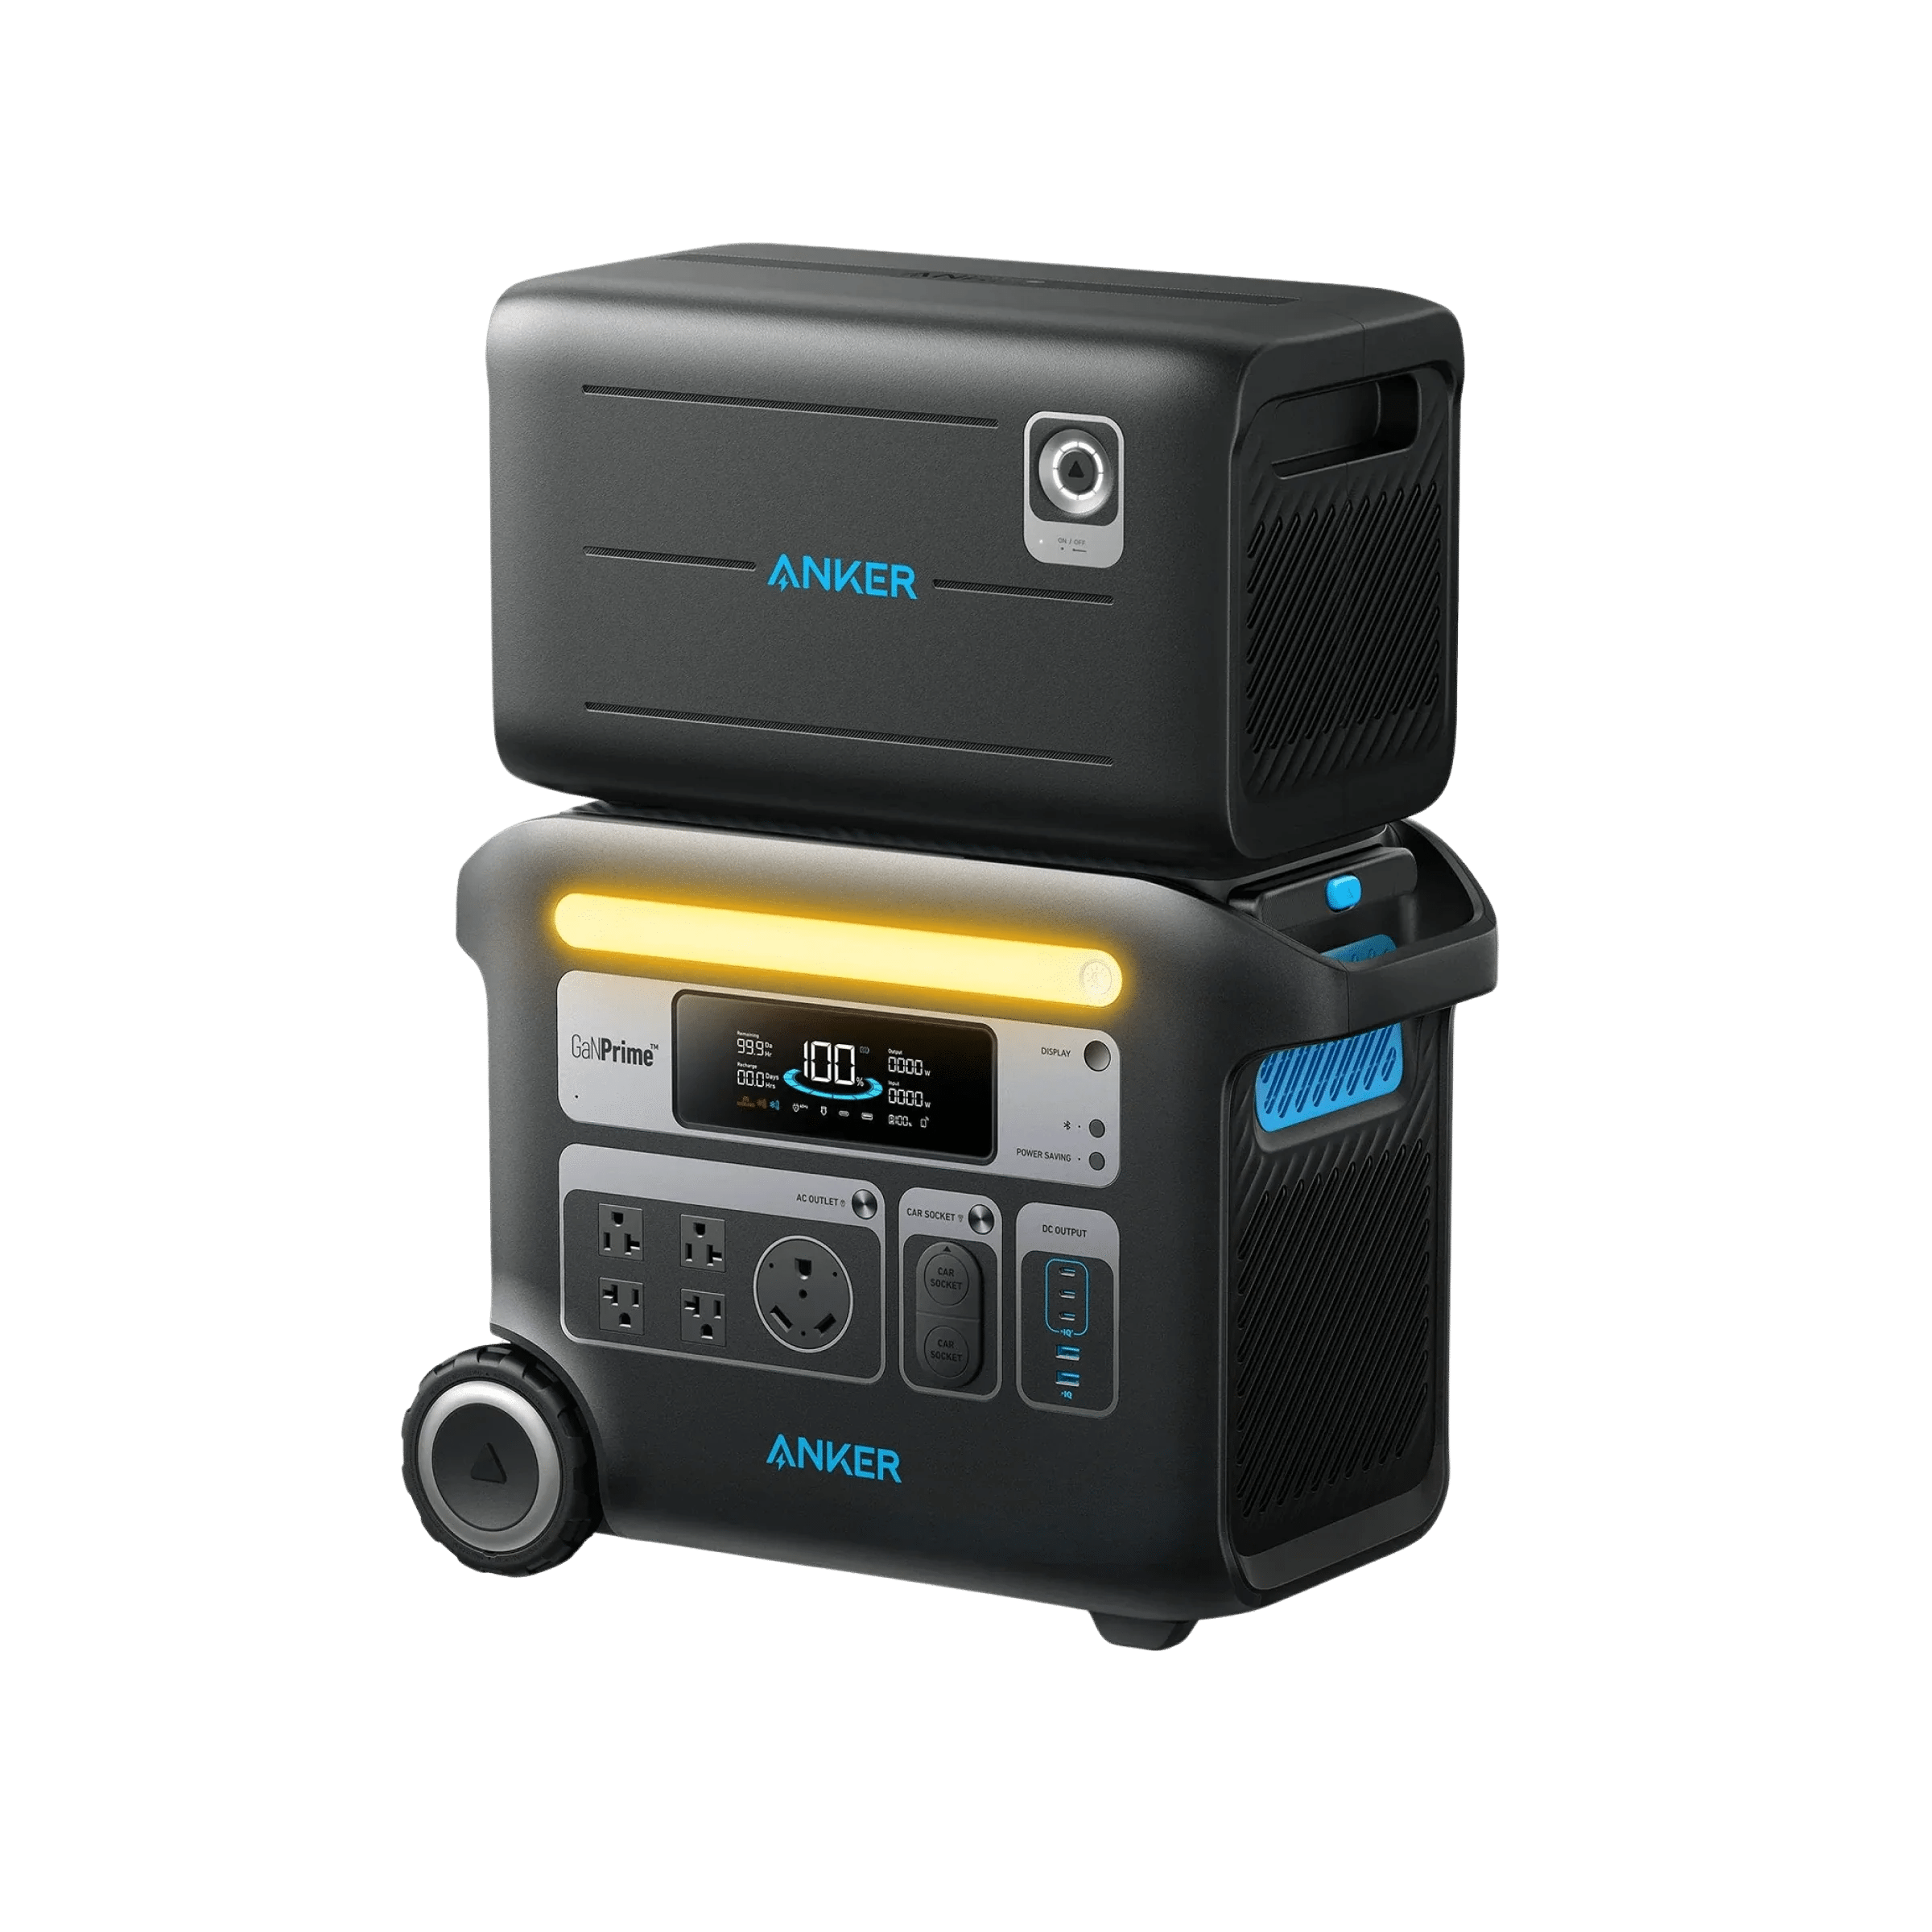 Anker SOLIX F2000 Solar Generator (Solar Generator 767 with 3x 200W Solar Panel and Expansion Battery) Anker In Stock Portable Power Stations